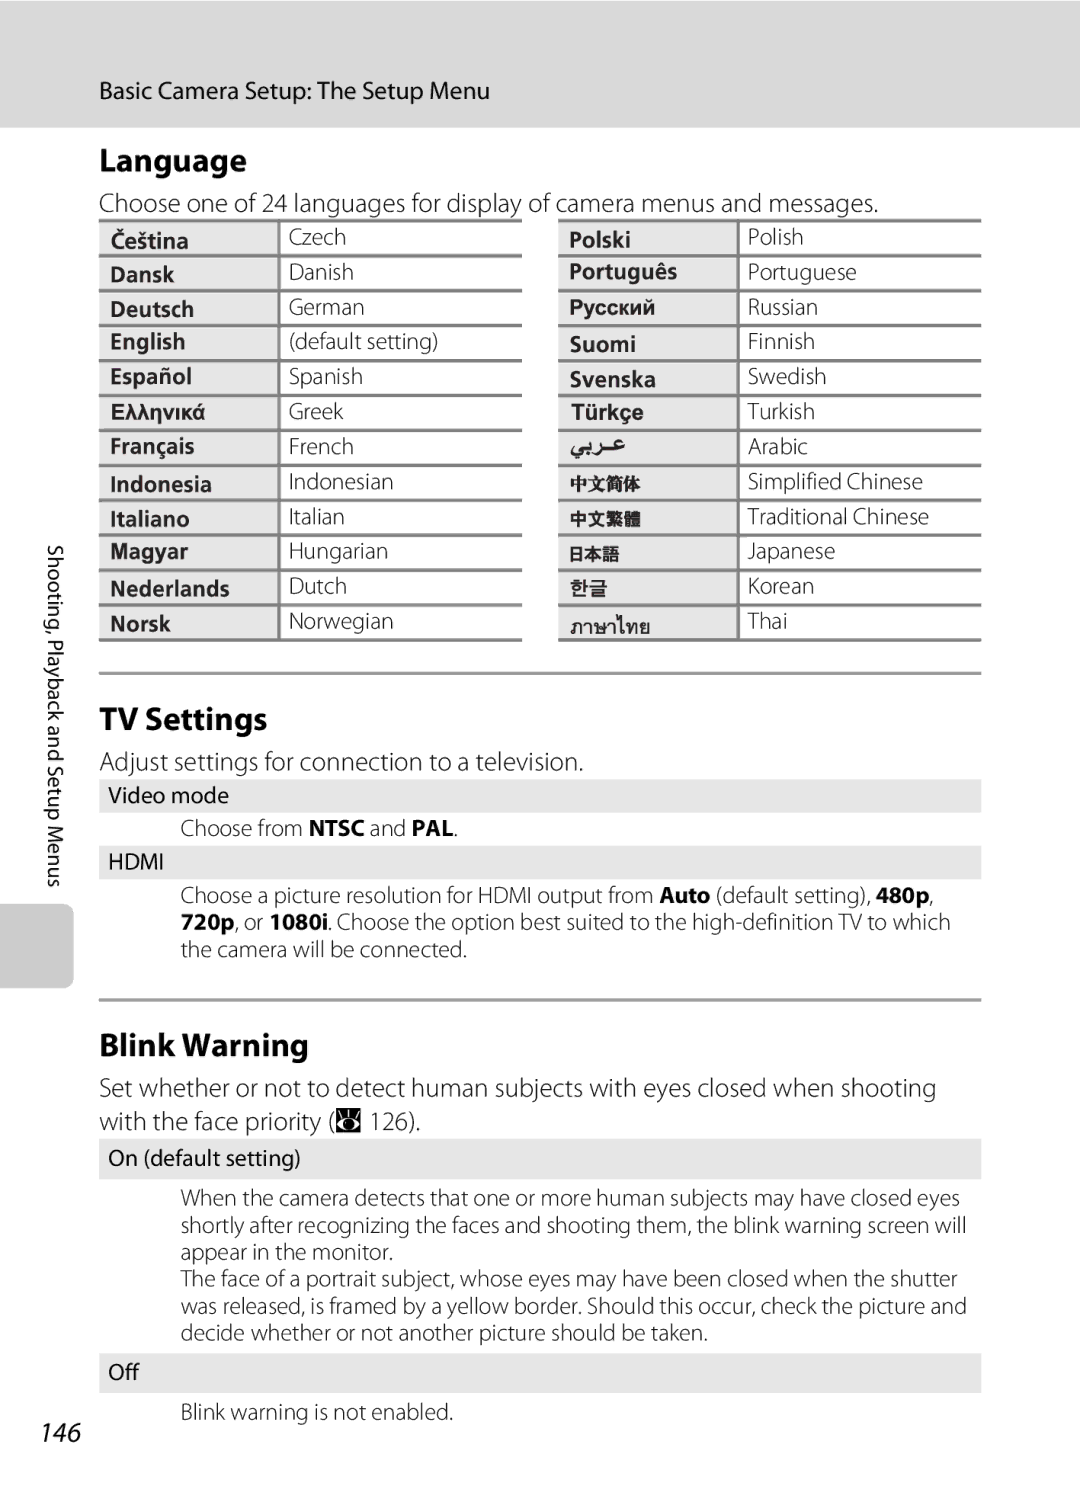 Nikon COOLPIXS60BK user manual Language, TV Settings, Blink Warning, 146, Adjust settings for connection to a television 